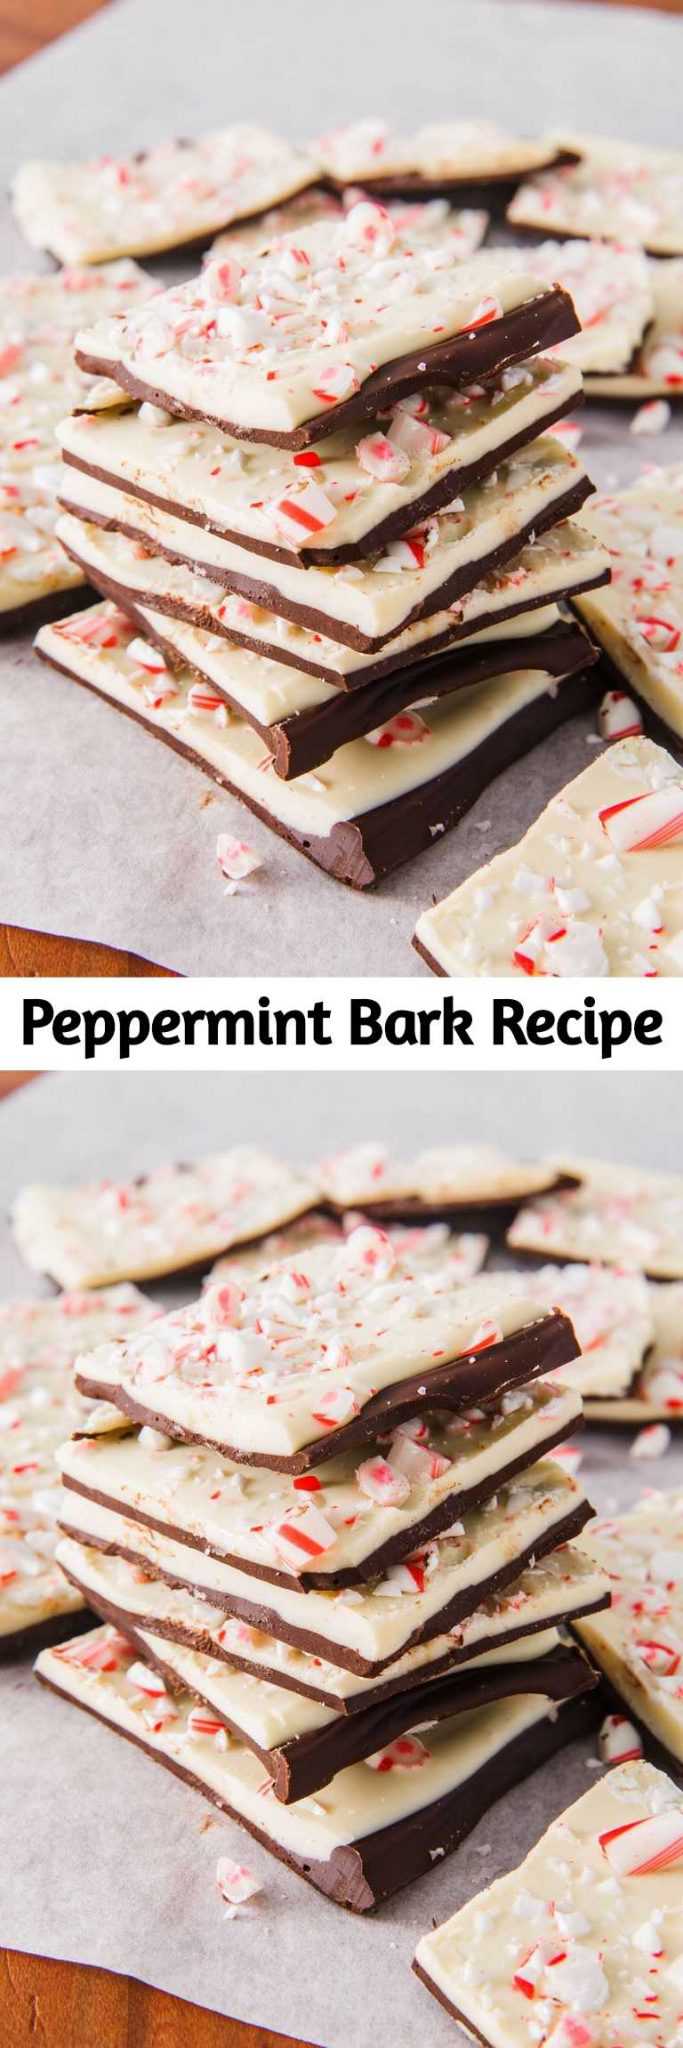 Peppermint Bark Recipe - Peppermint bark is a candy we cannot wait to get our hands on every holiday season. Luckily for you, you can make a batch in 10 minutes flat.